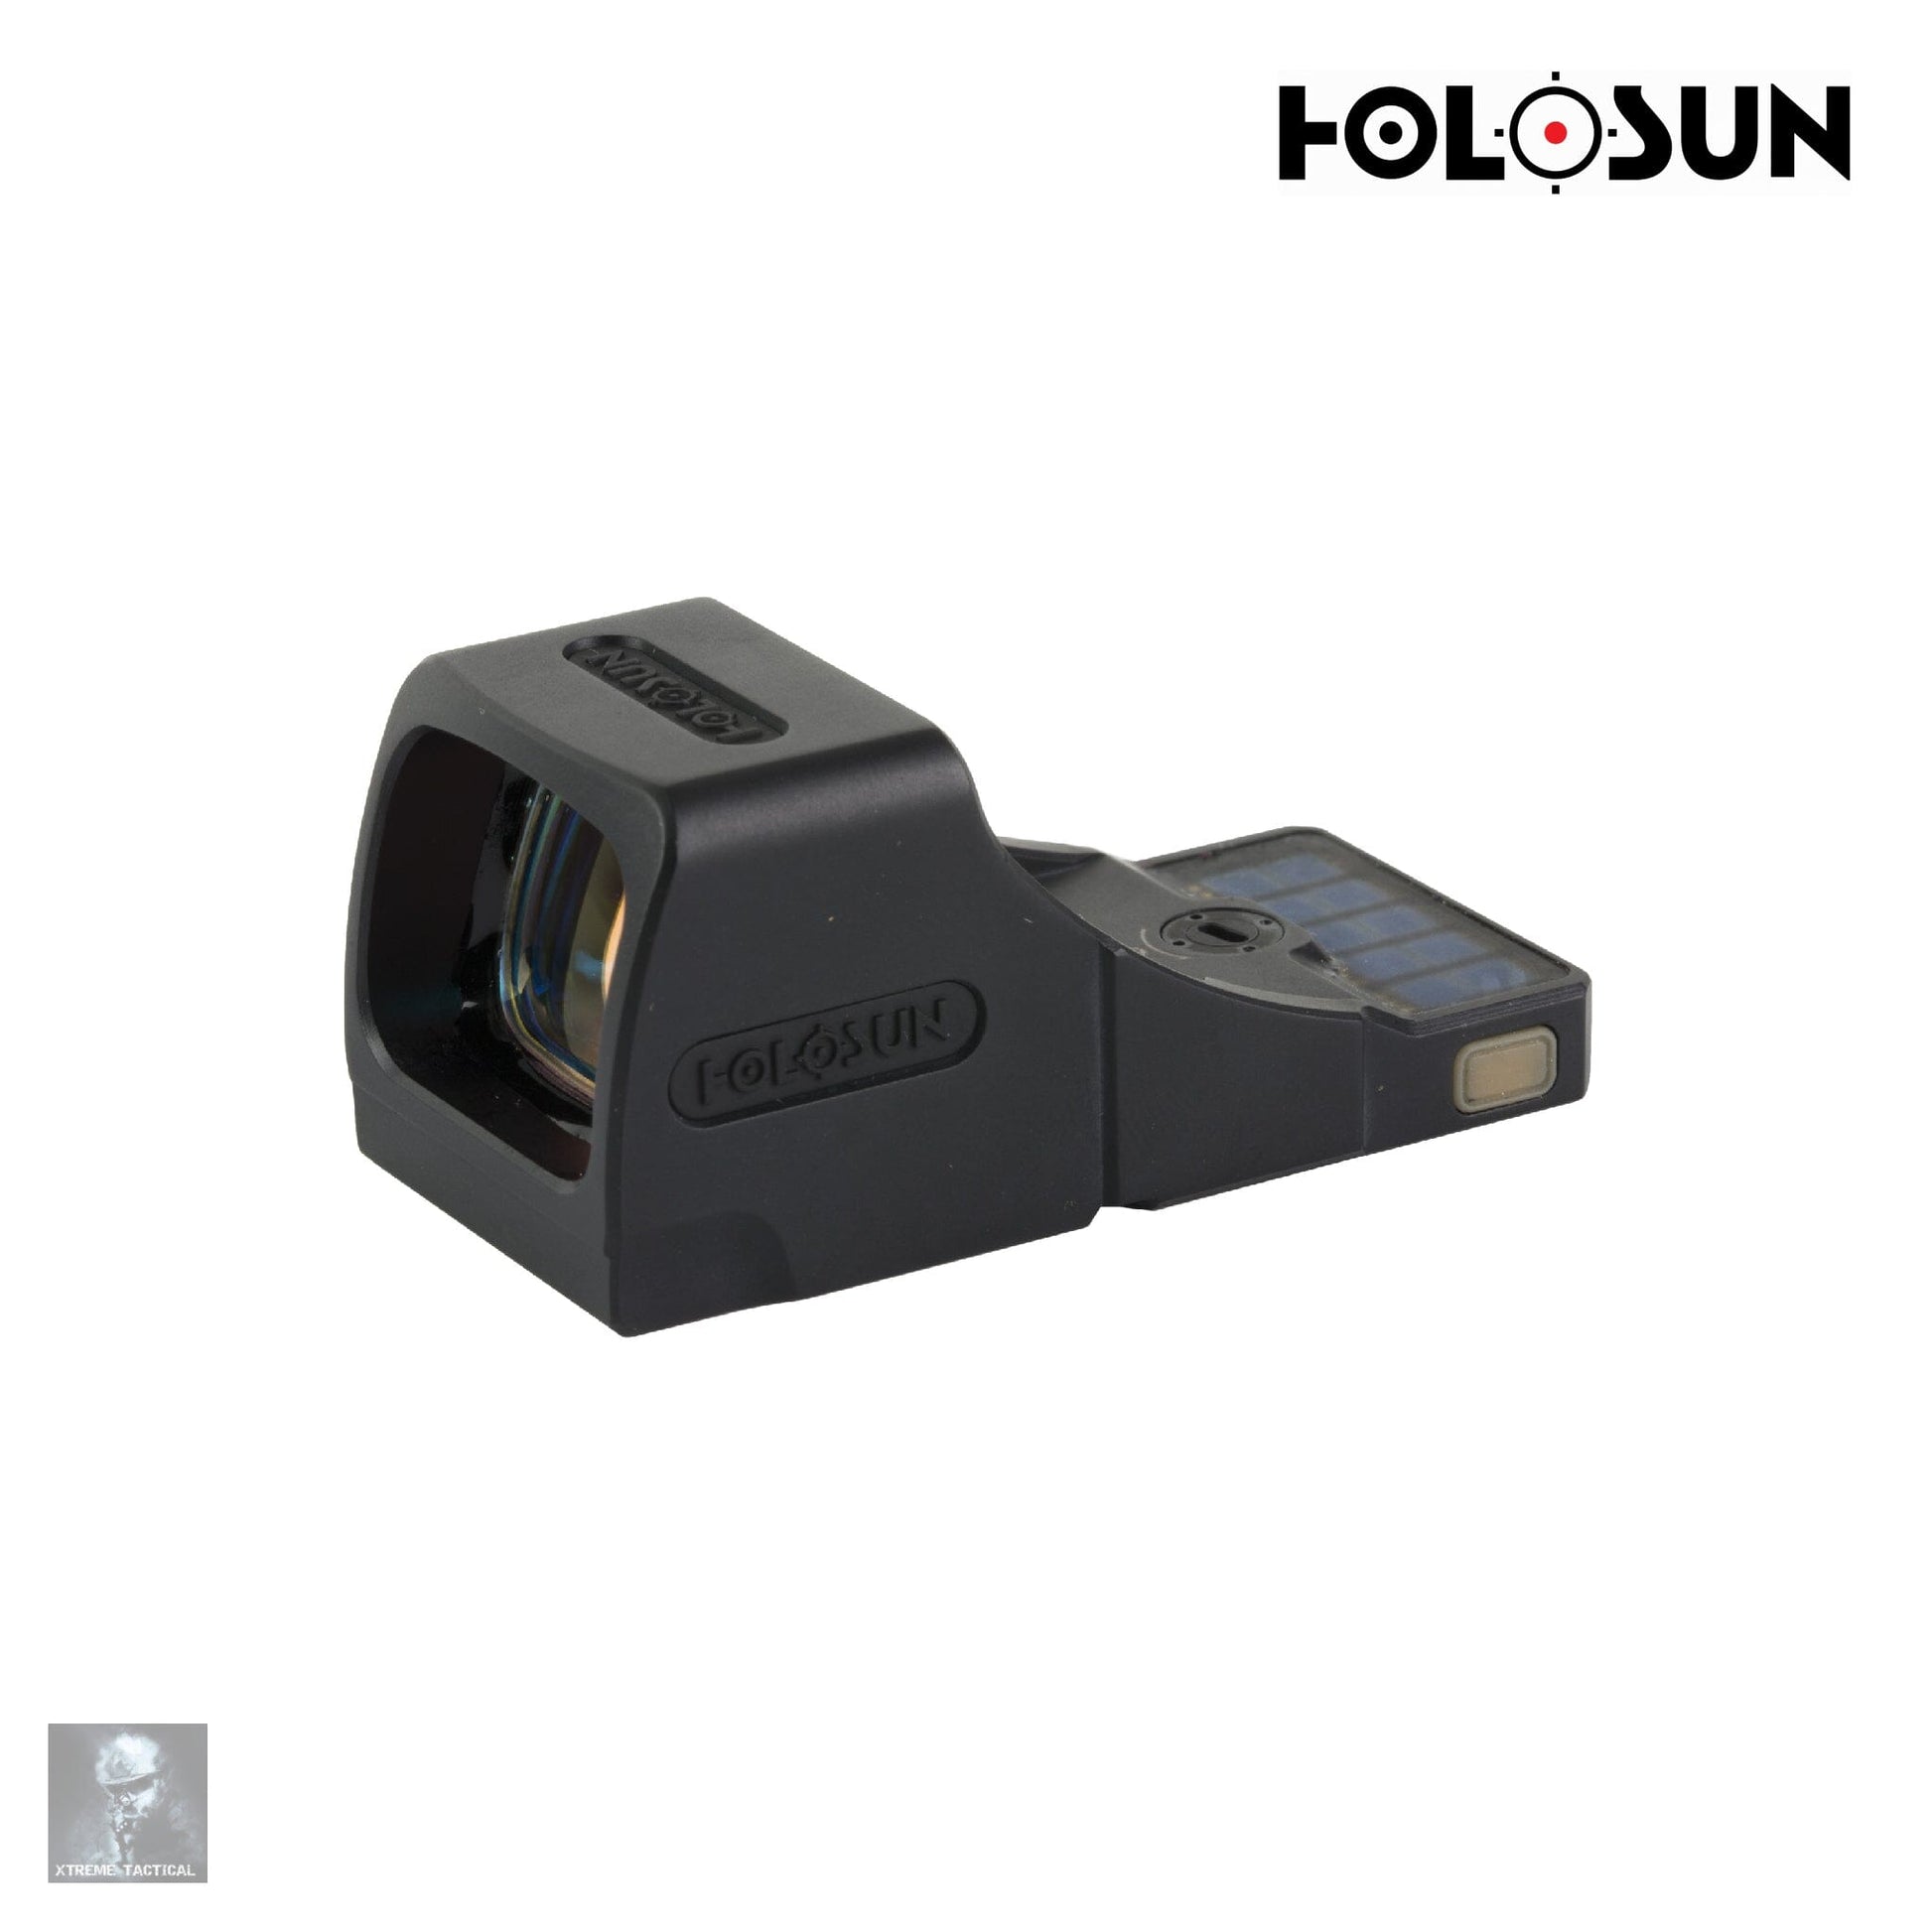 Holosun SCS Green Dot Sight for Smith & Wesson M&P - SCS-MP2-GR Green Dot Sight Holosun Technologies 